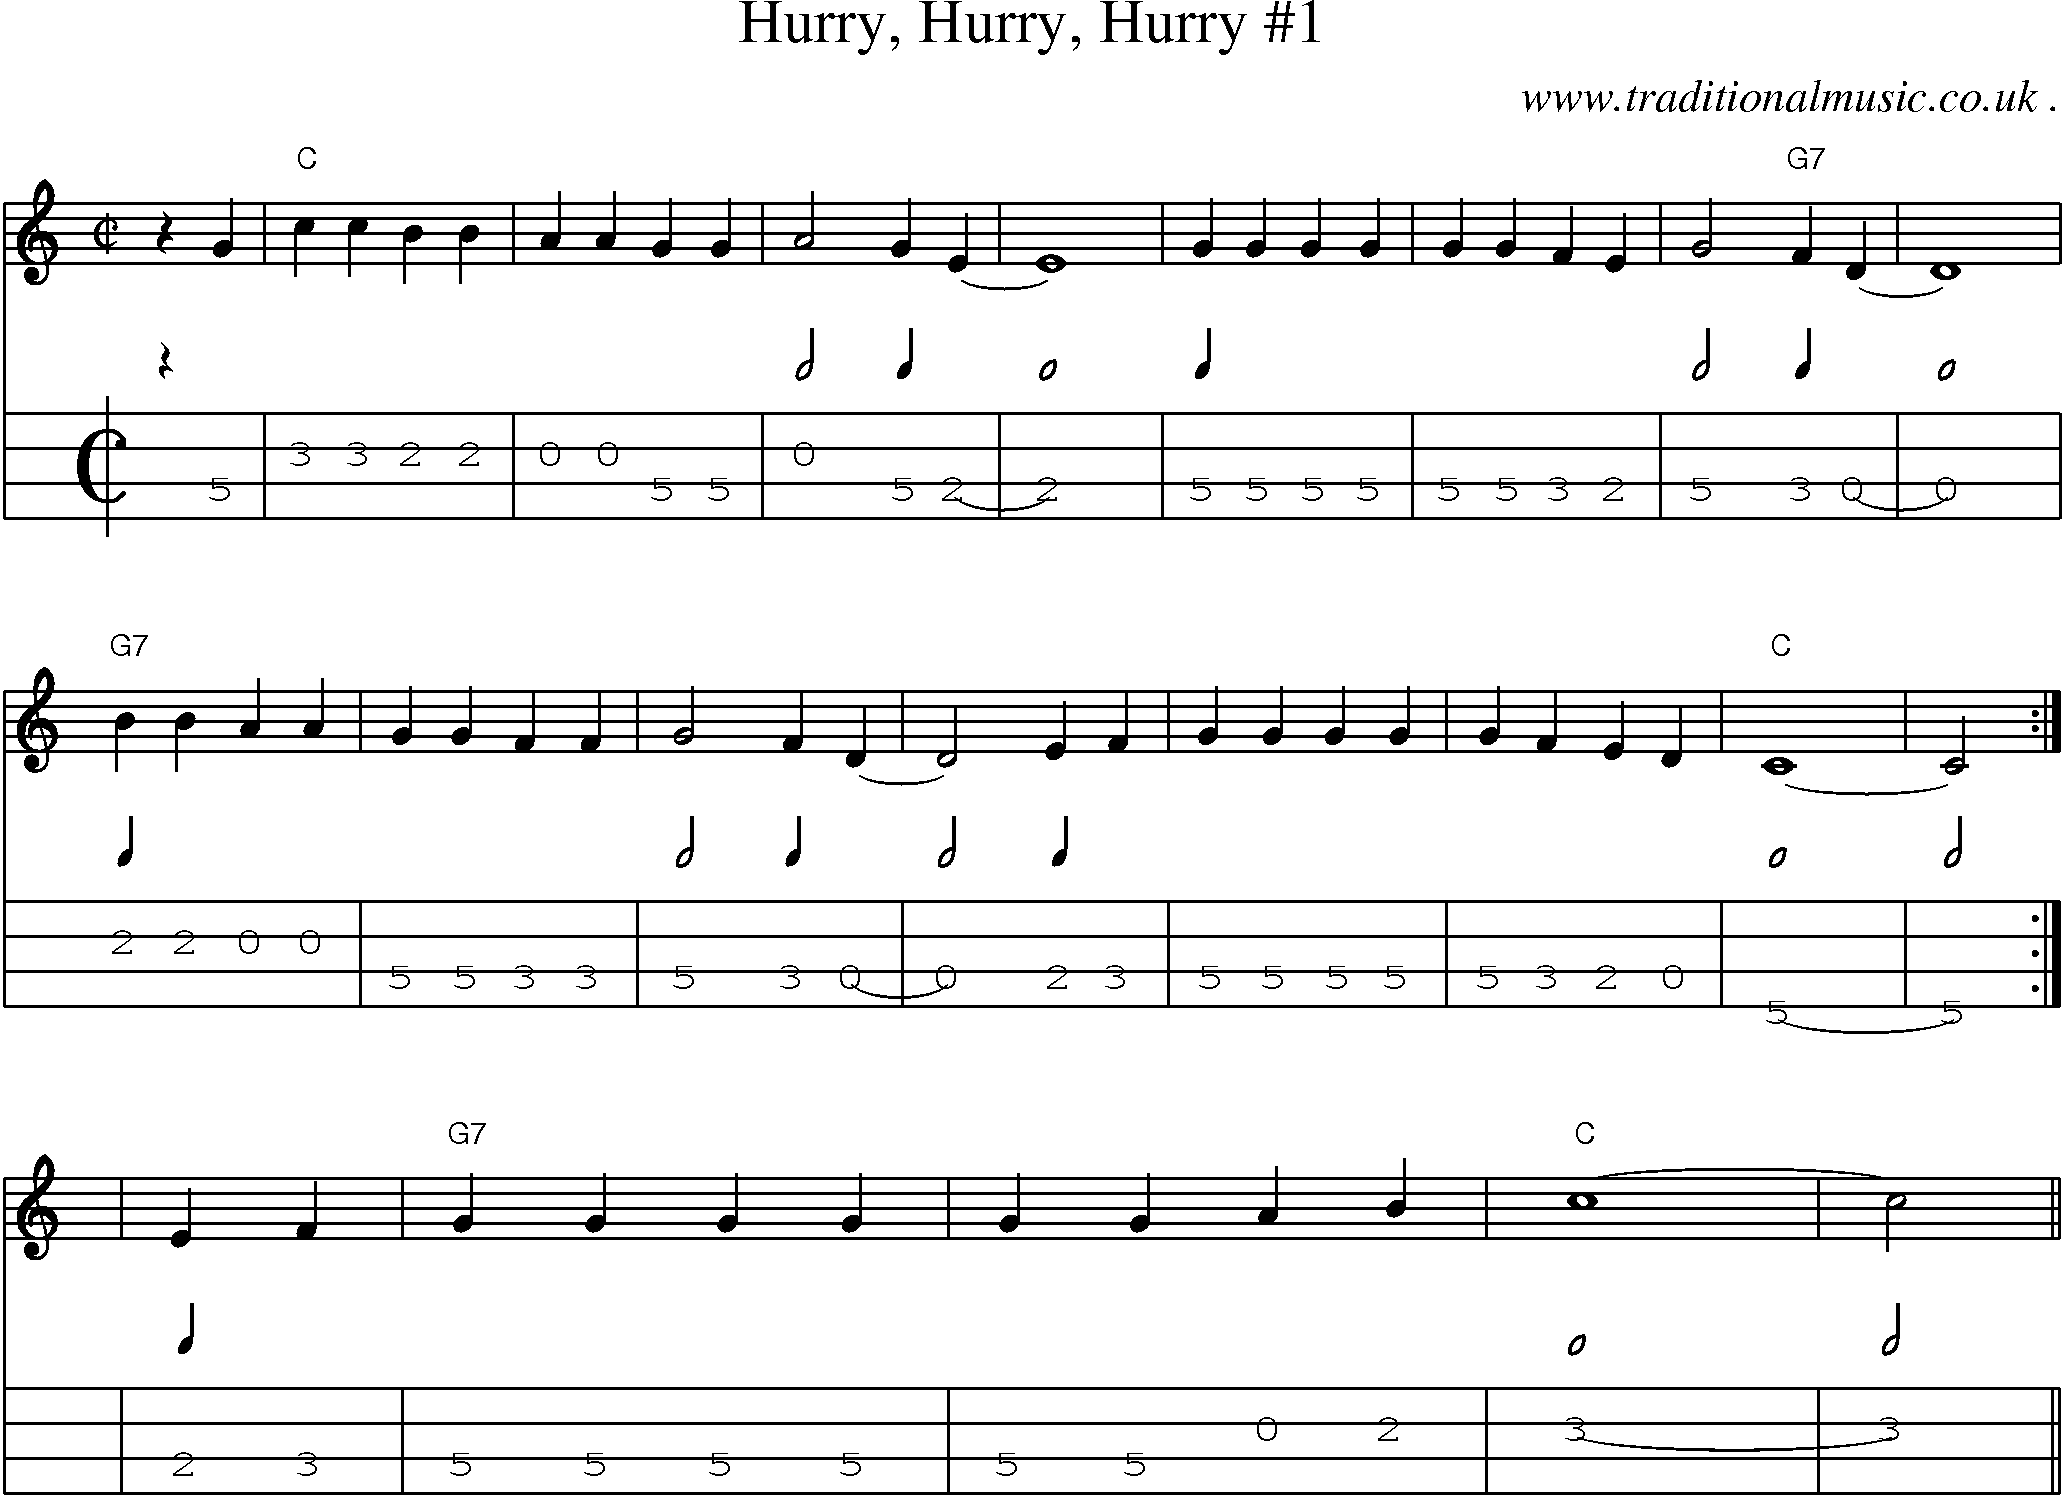 Music Score and Guitar Tabs for Hurry Hurry Hurry 1